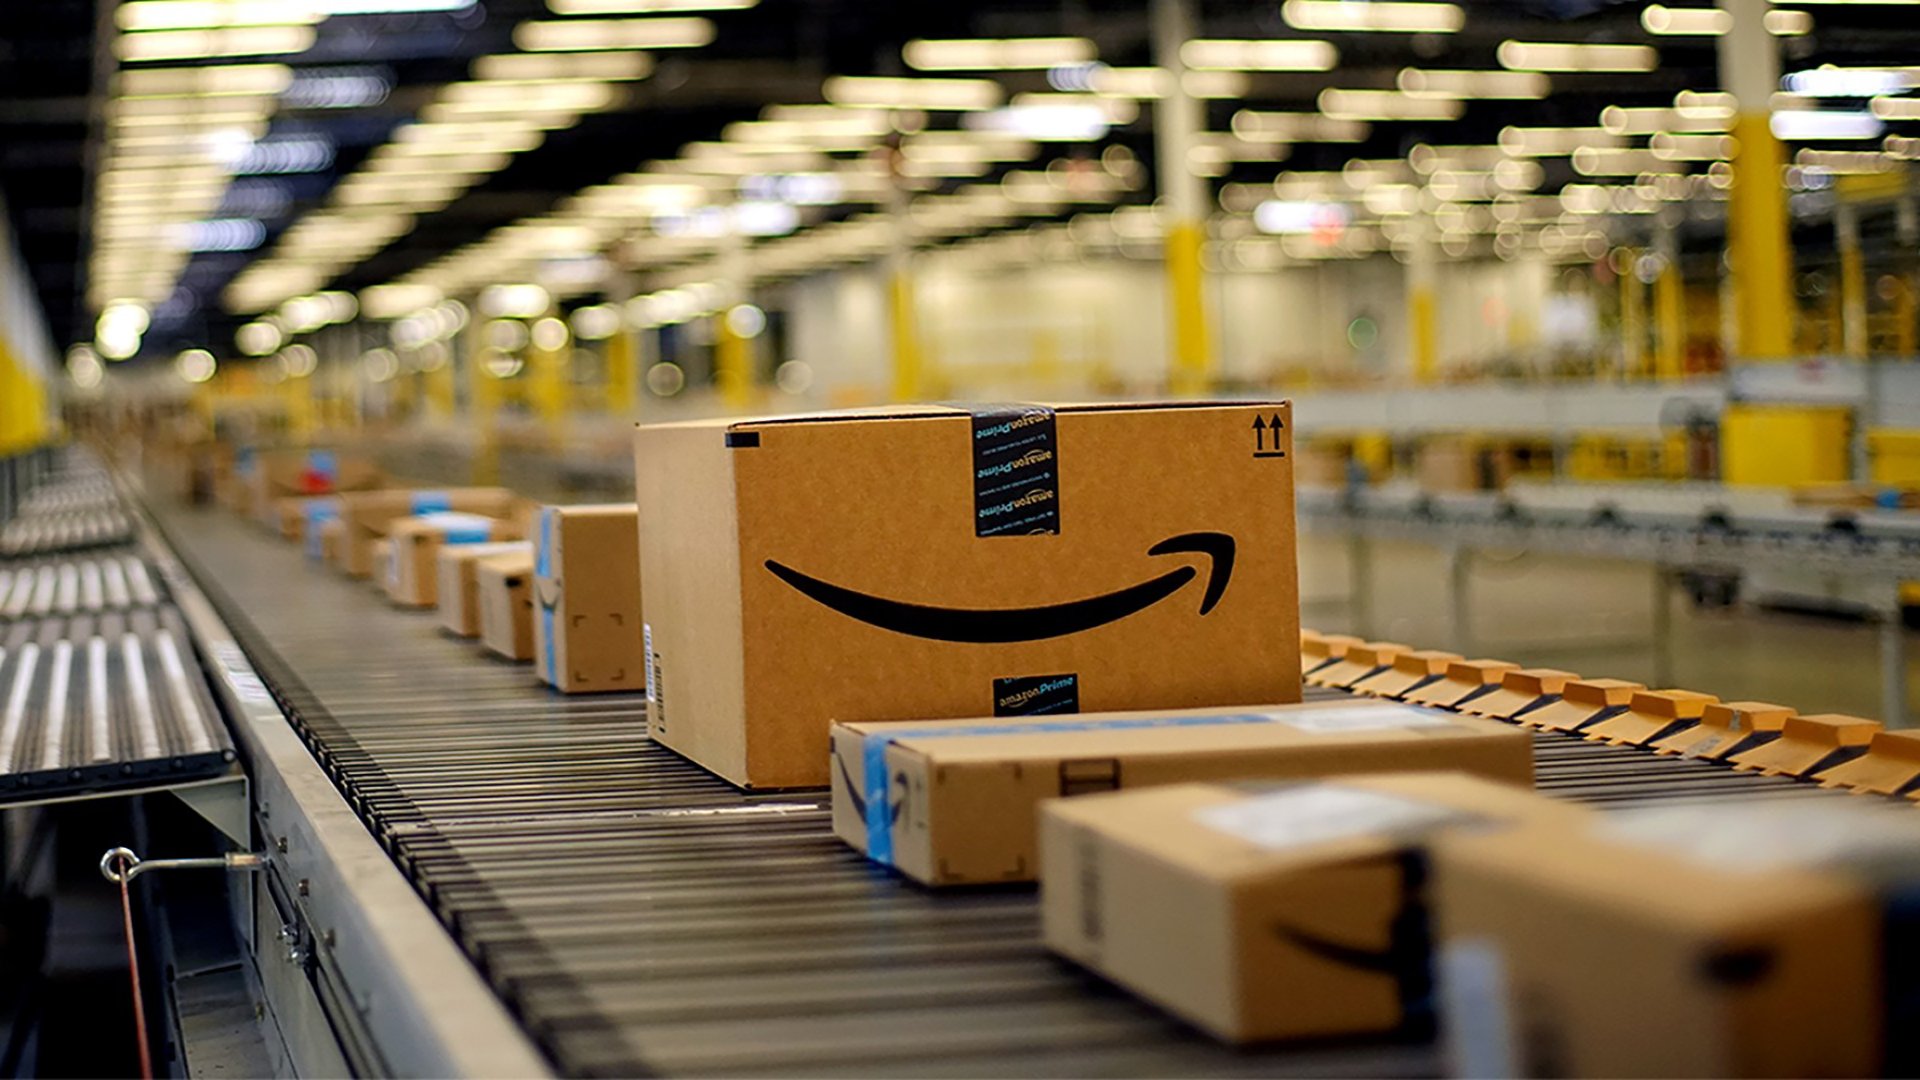 Expanding From eBay to Amazon: 5 Things You Need to Know